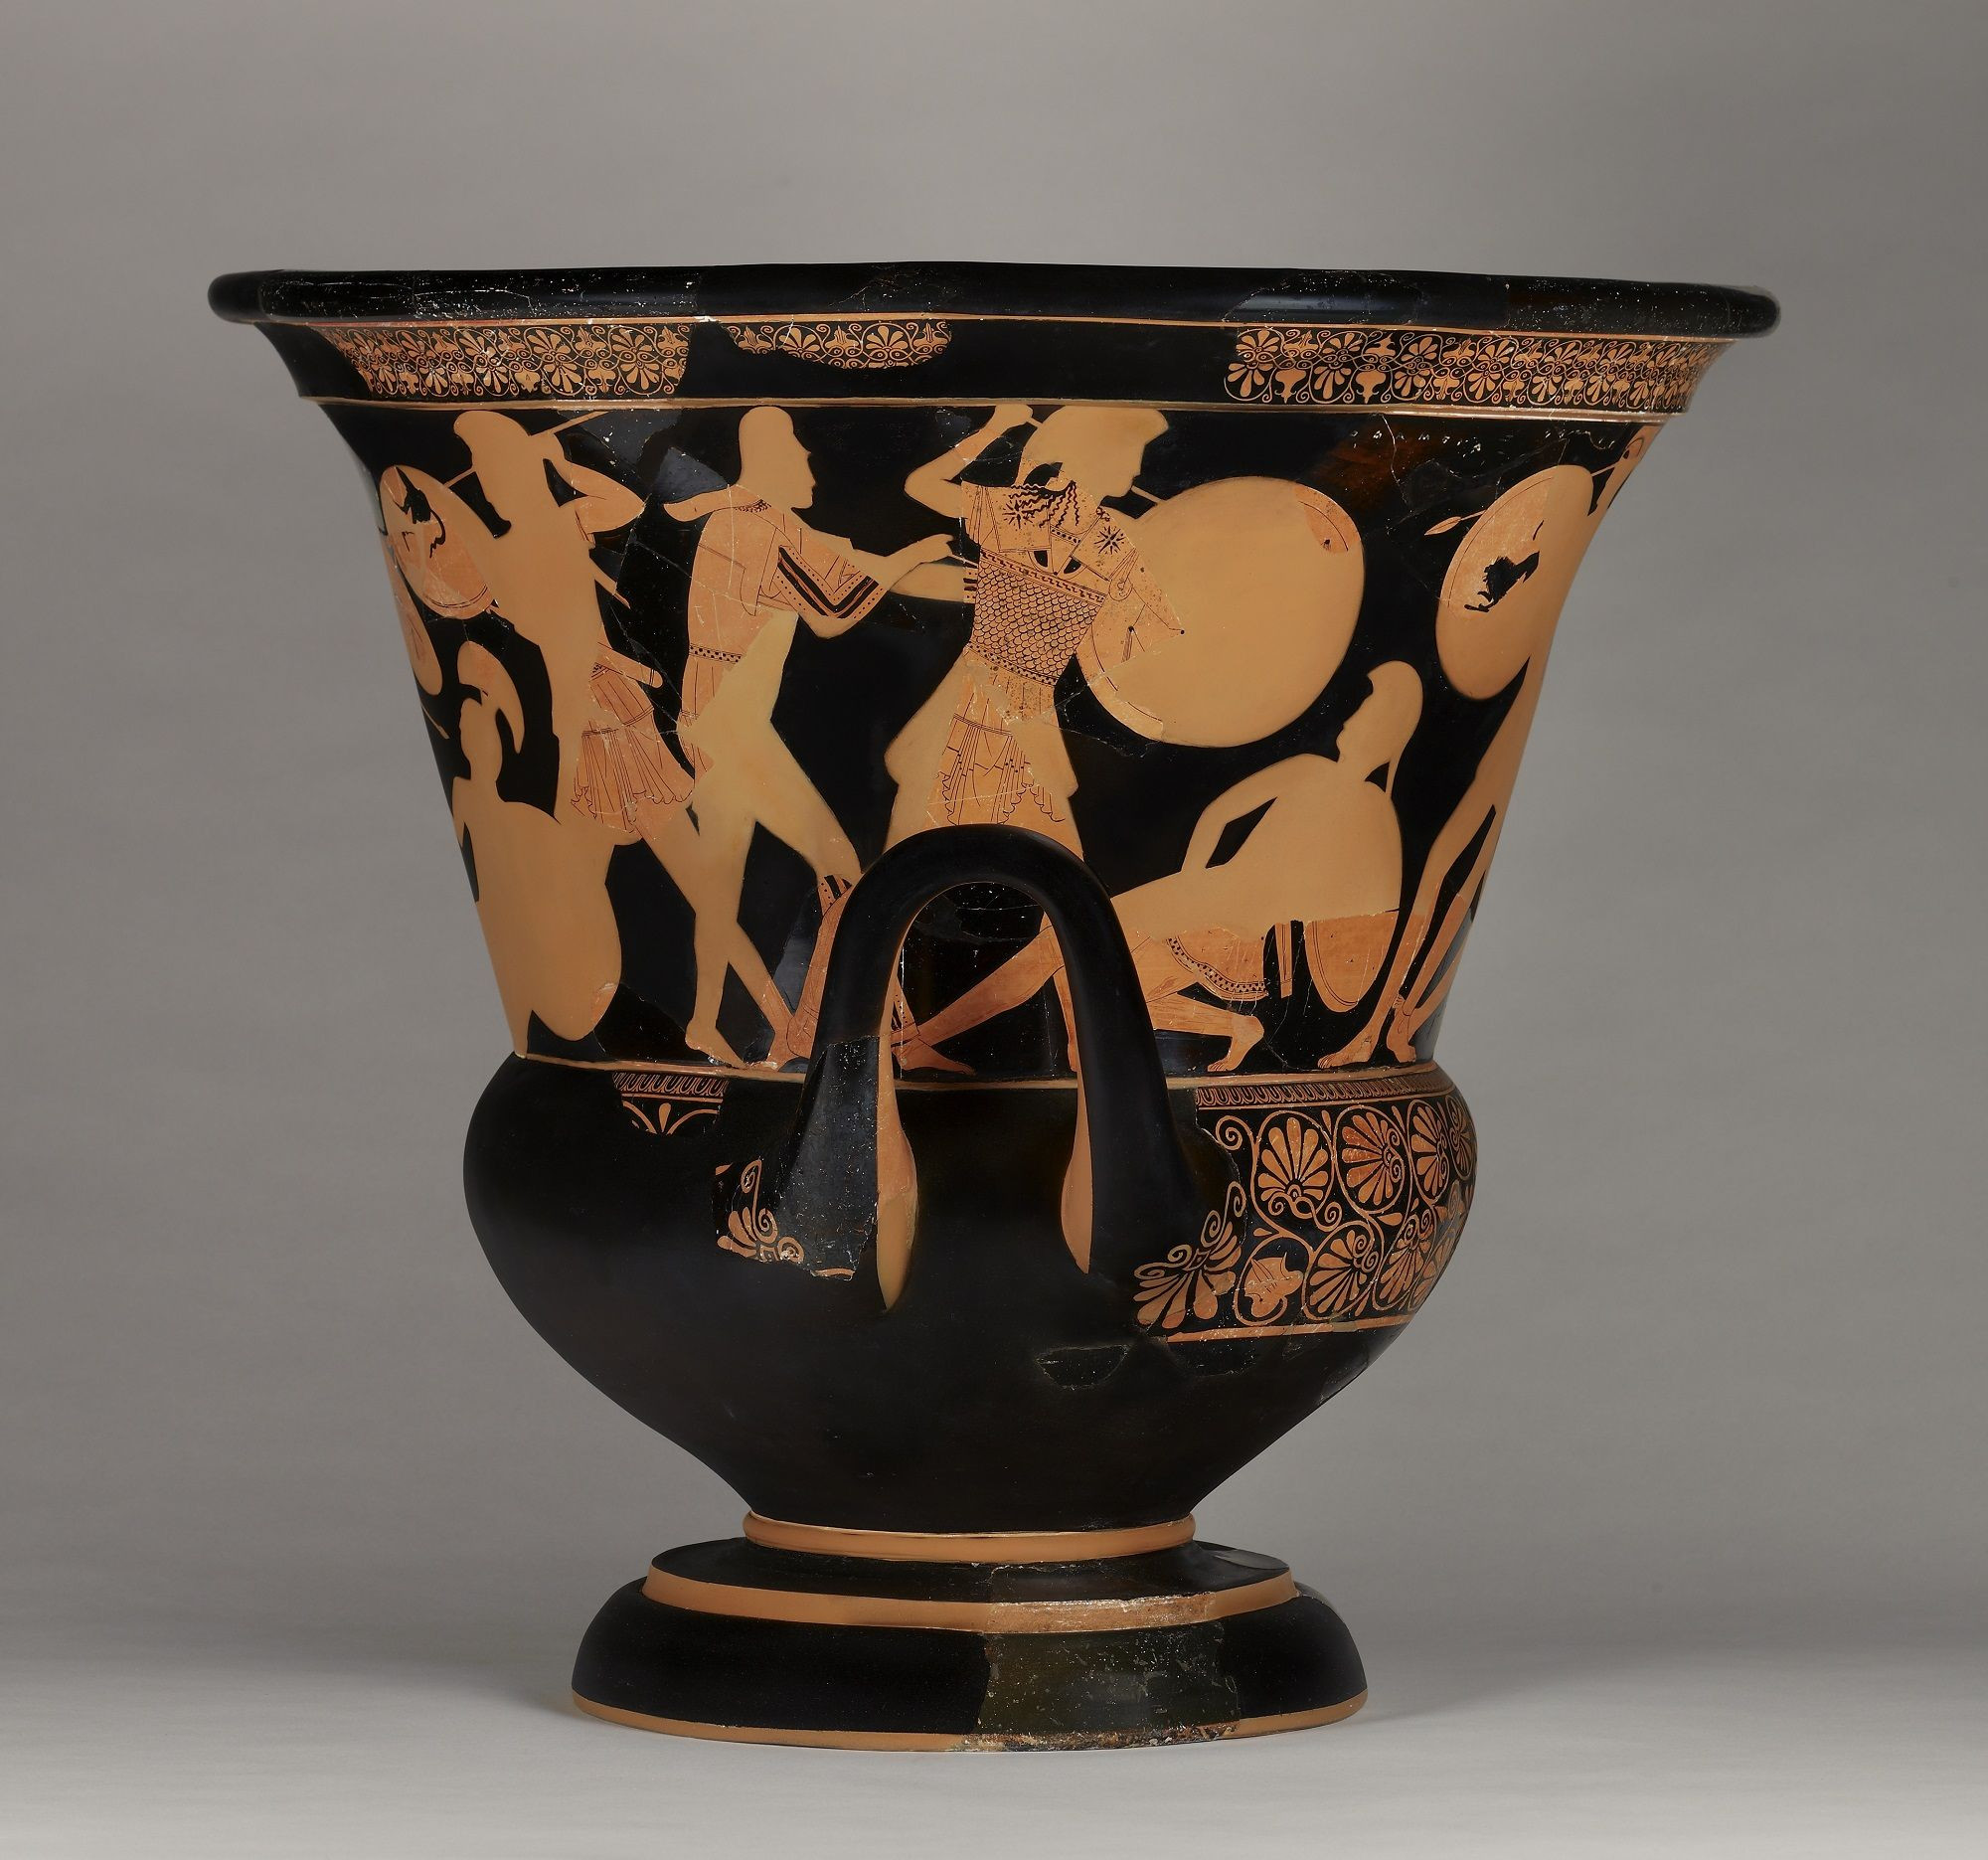 24 Unique Buy Vase Online 2024 free download buy vase online of via the getty online collection hoplite depictions pinterest pertaining to via the getty online collection ac2b7 online collectionsvaseflower